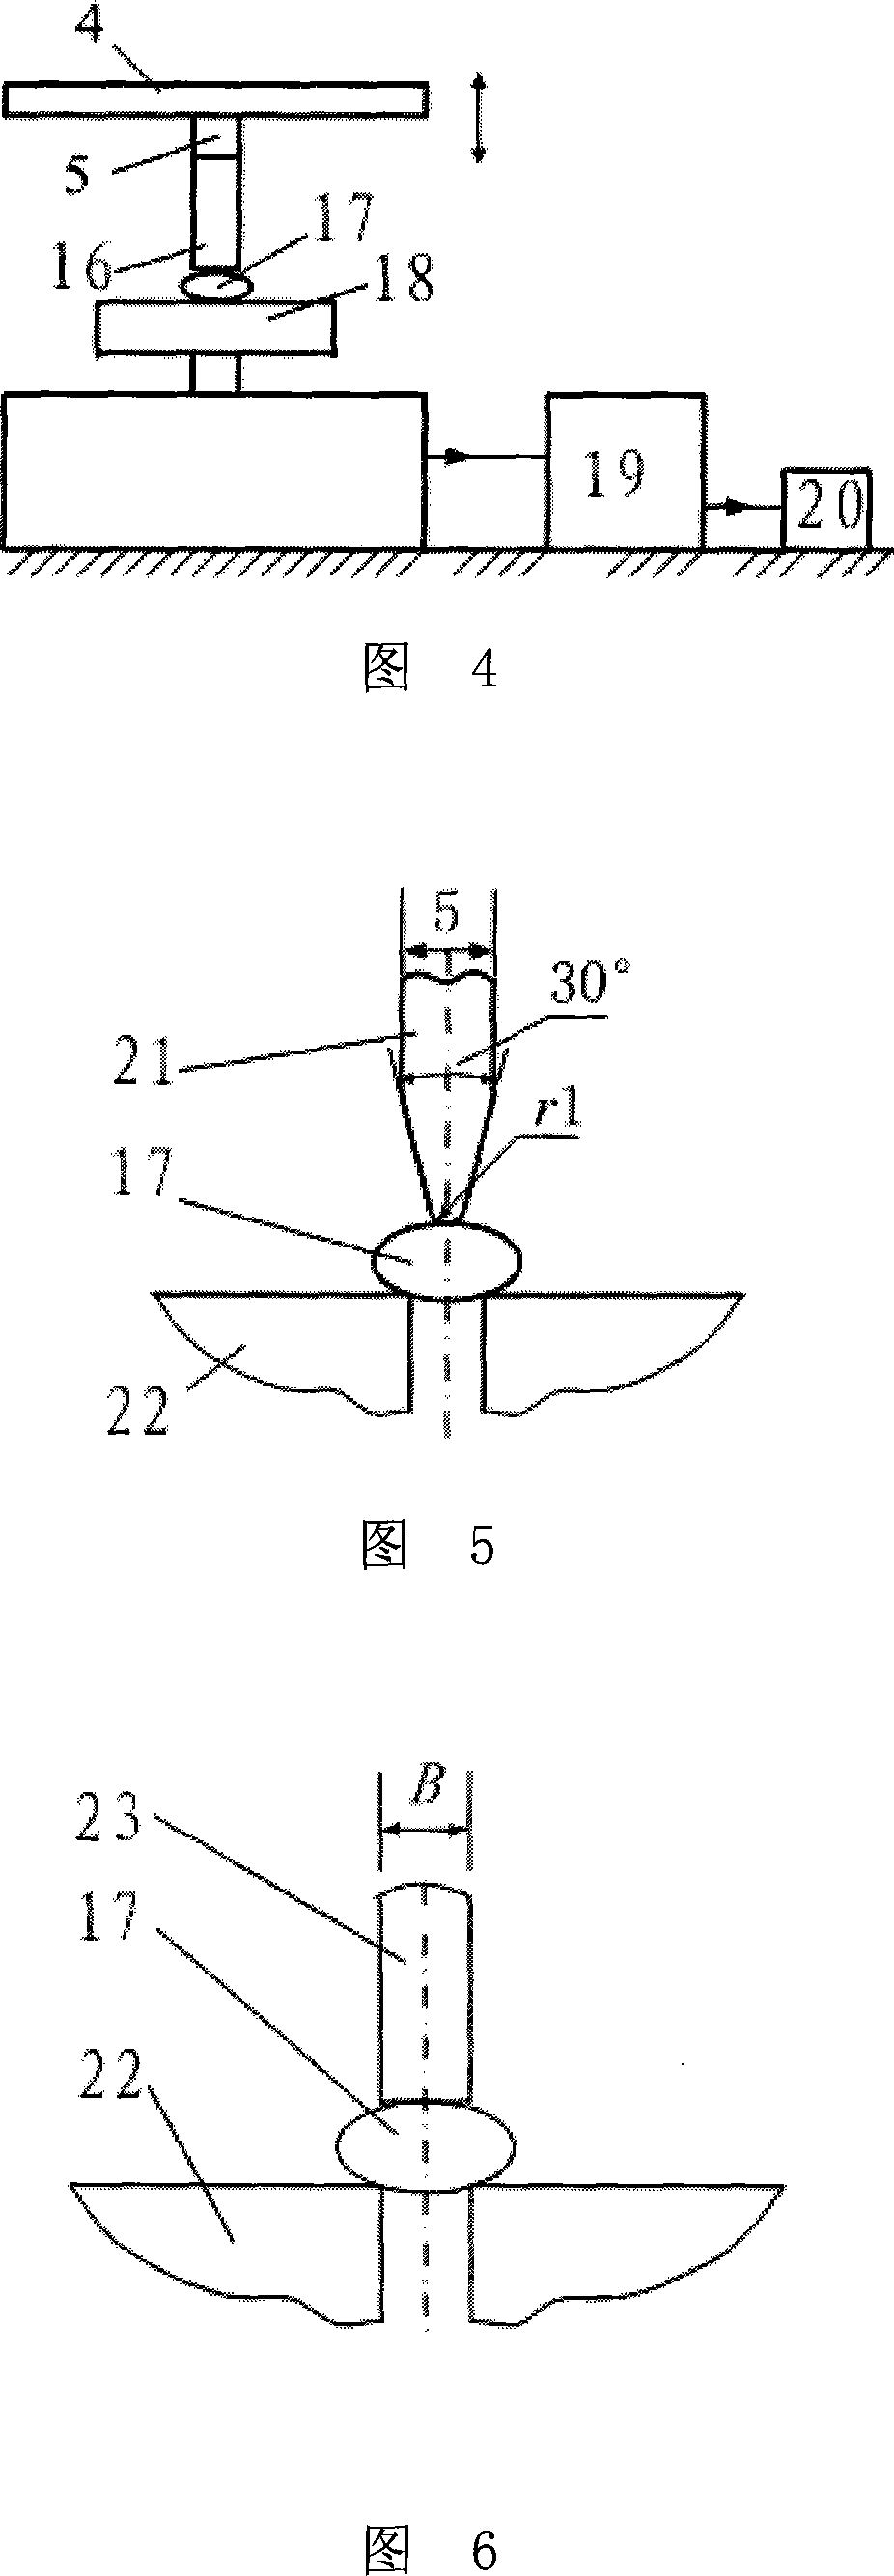 Agricultural material dynamic characteristic test apparatus and method